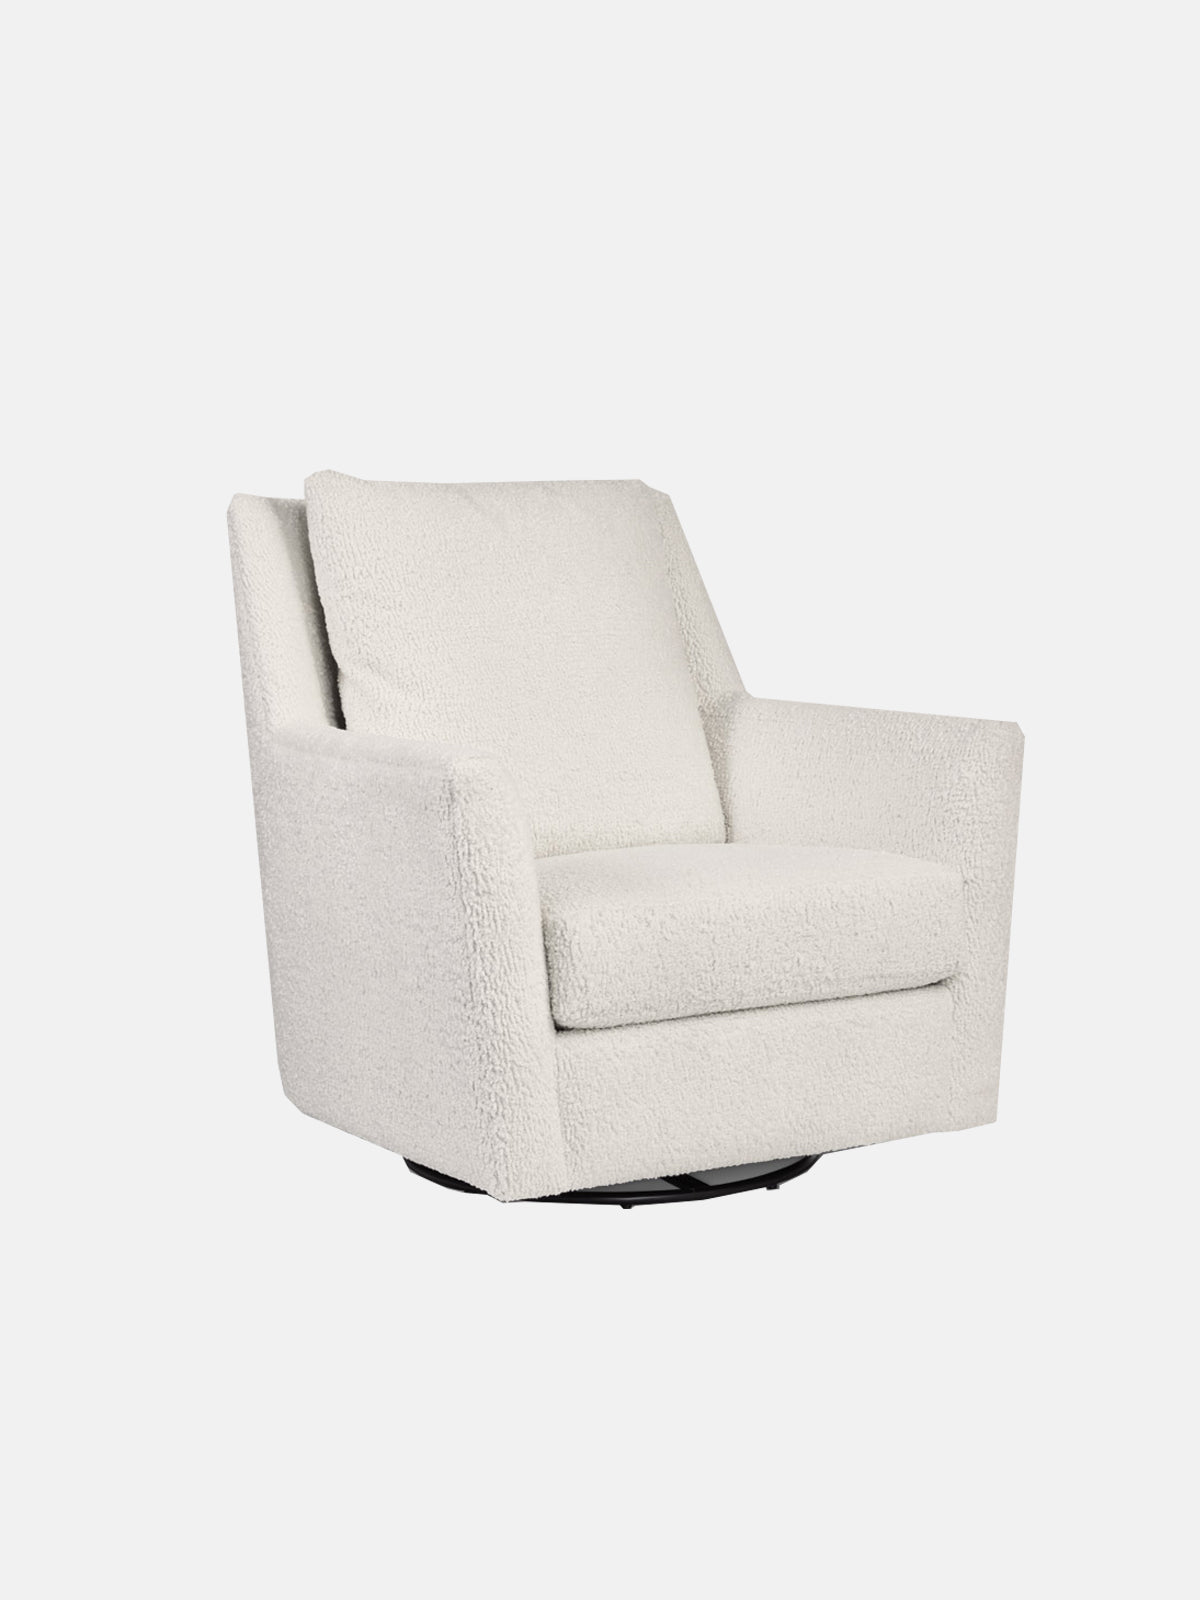 The Womb Swivel Glider Chair